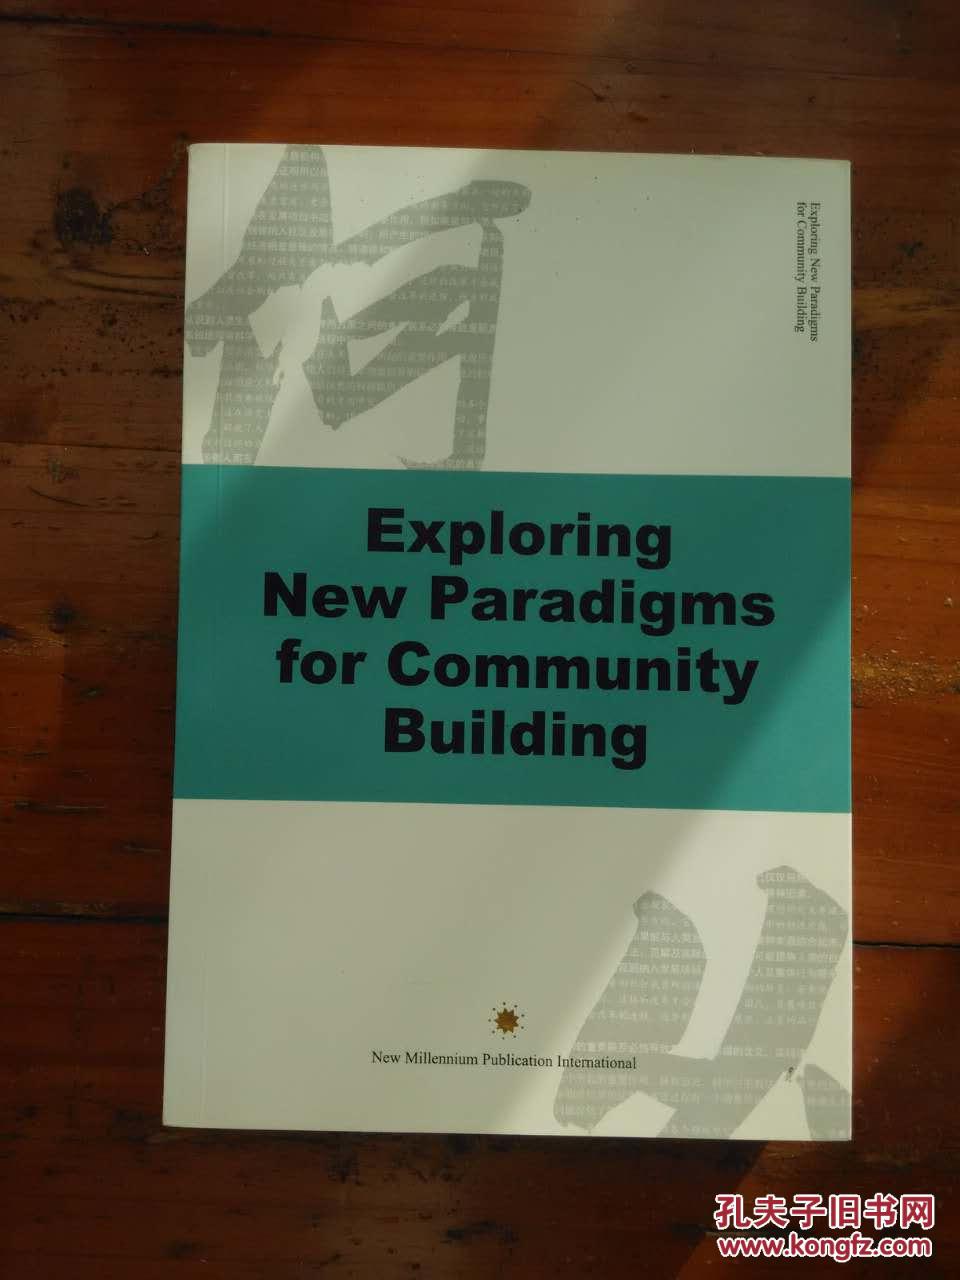 Exploring New Paradigms for Community Building